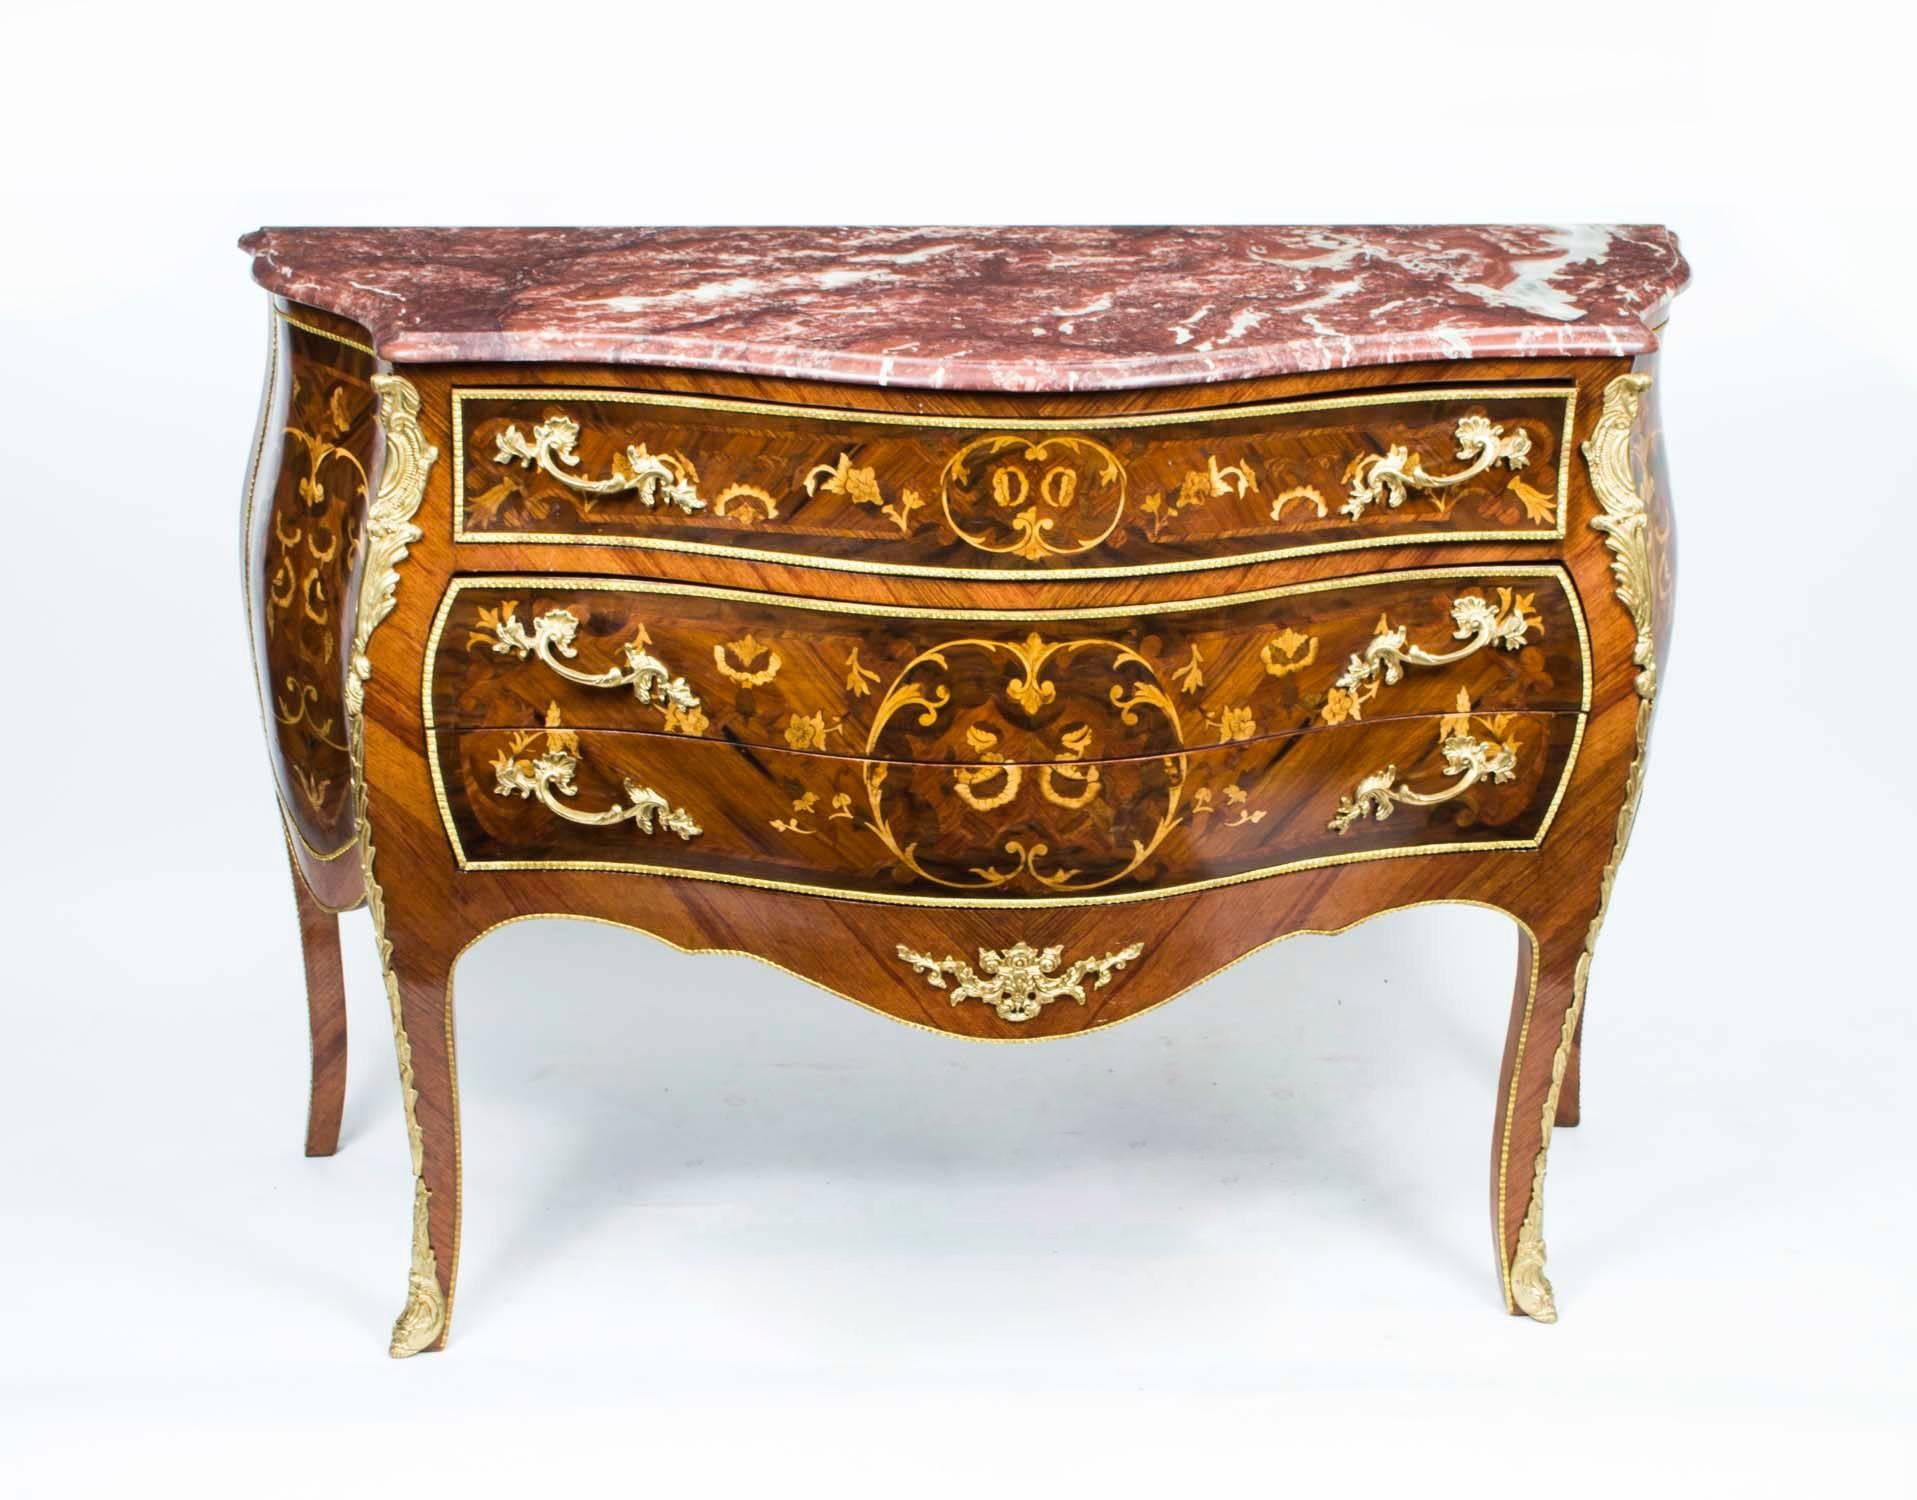 An absolutely breathtaking large French walnut commode with exquisite marquetry decoration, ormolu mounts, and a fabulous Griotte marble top, in the Louis XV style, dating from the last quarter of the 20th century.

Add a touch of supreme grandeur